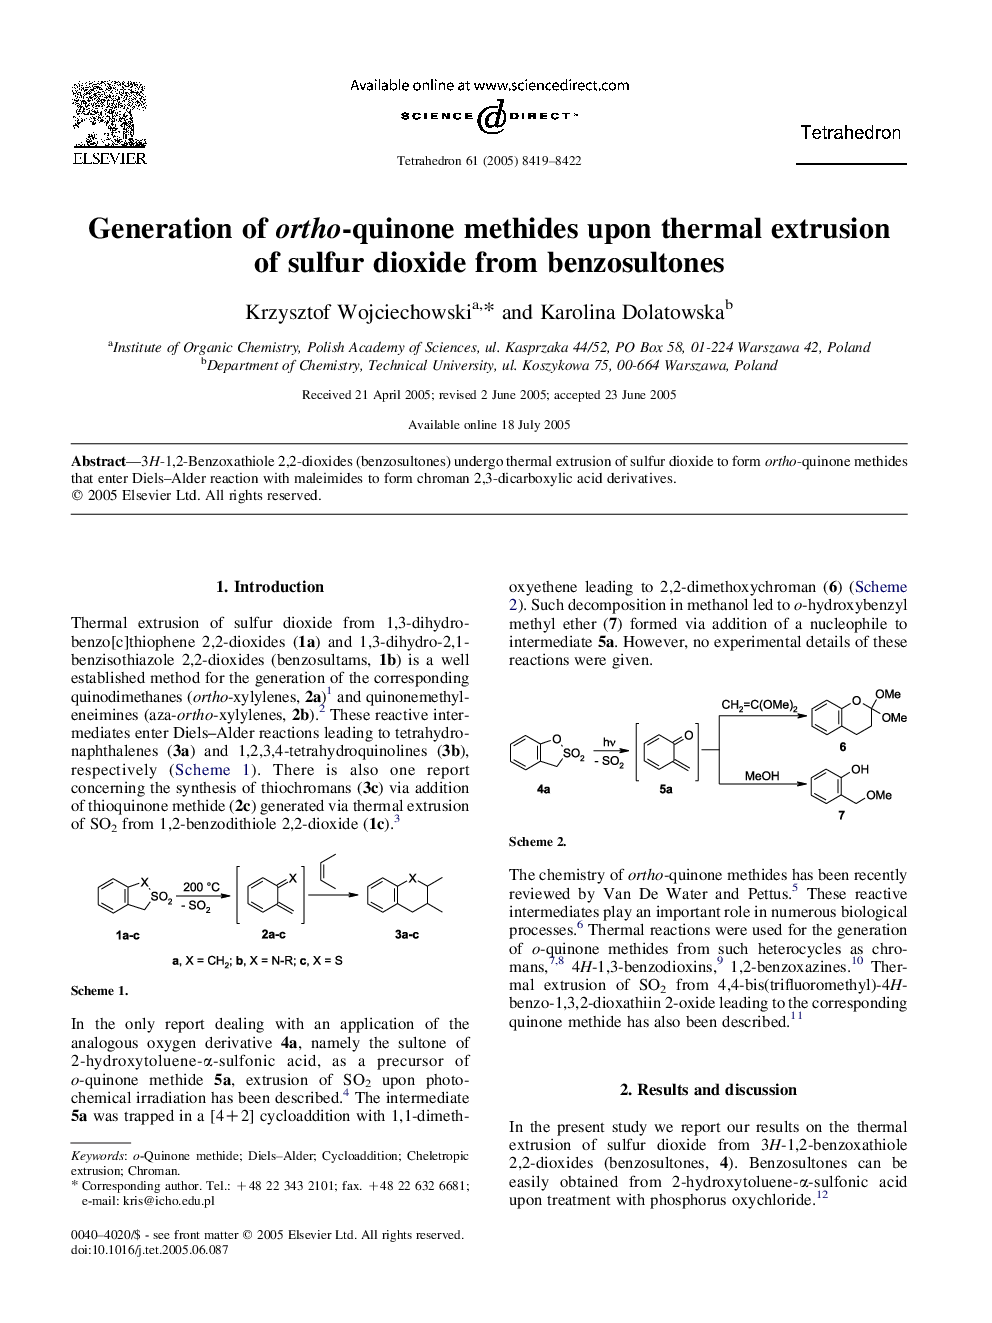 Generation of ortho-quinone methides upon thermal extrusion of sulfur dioxide from benzosultones